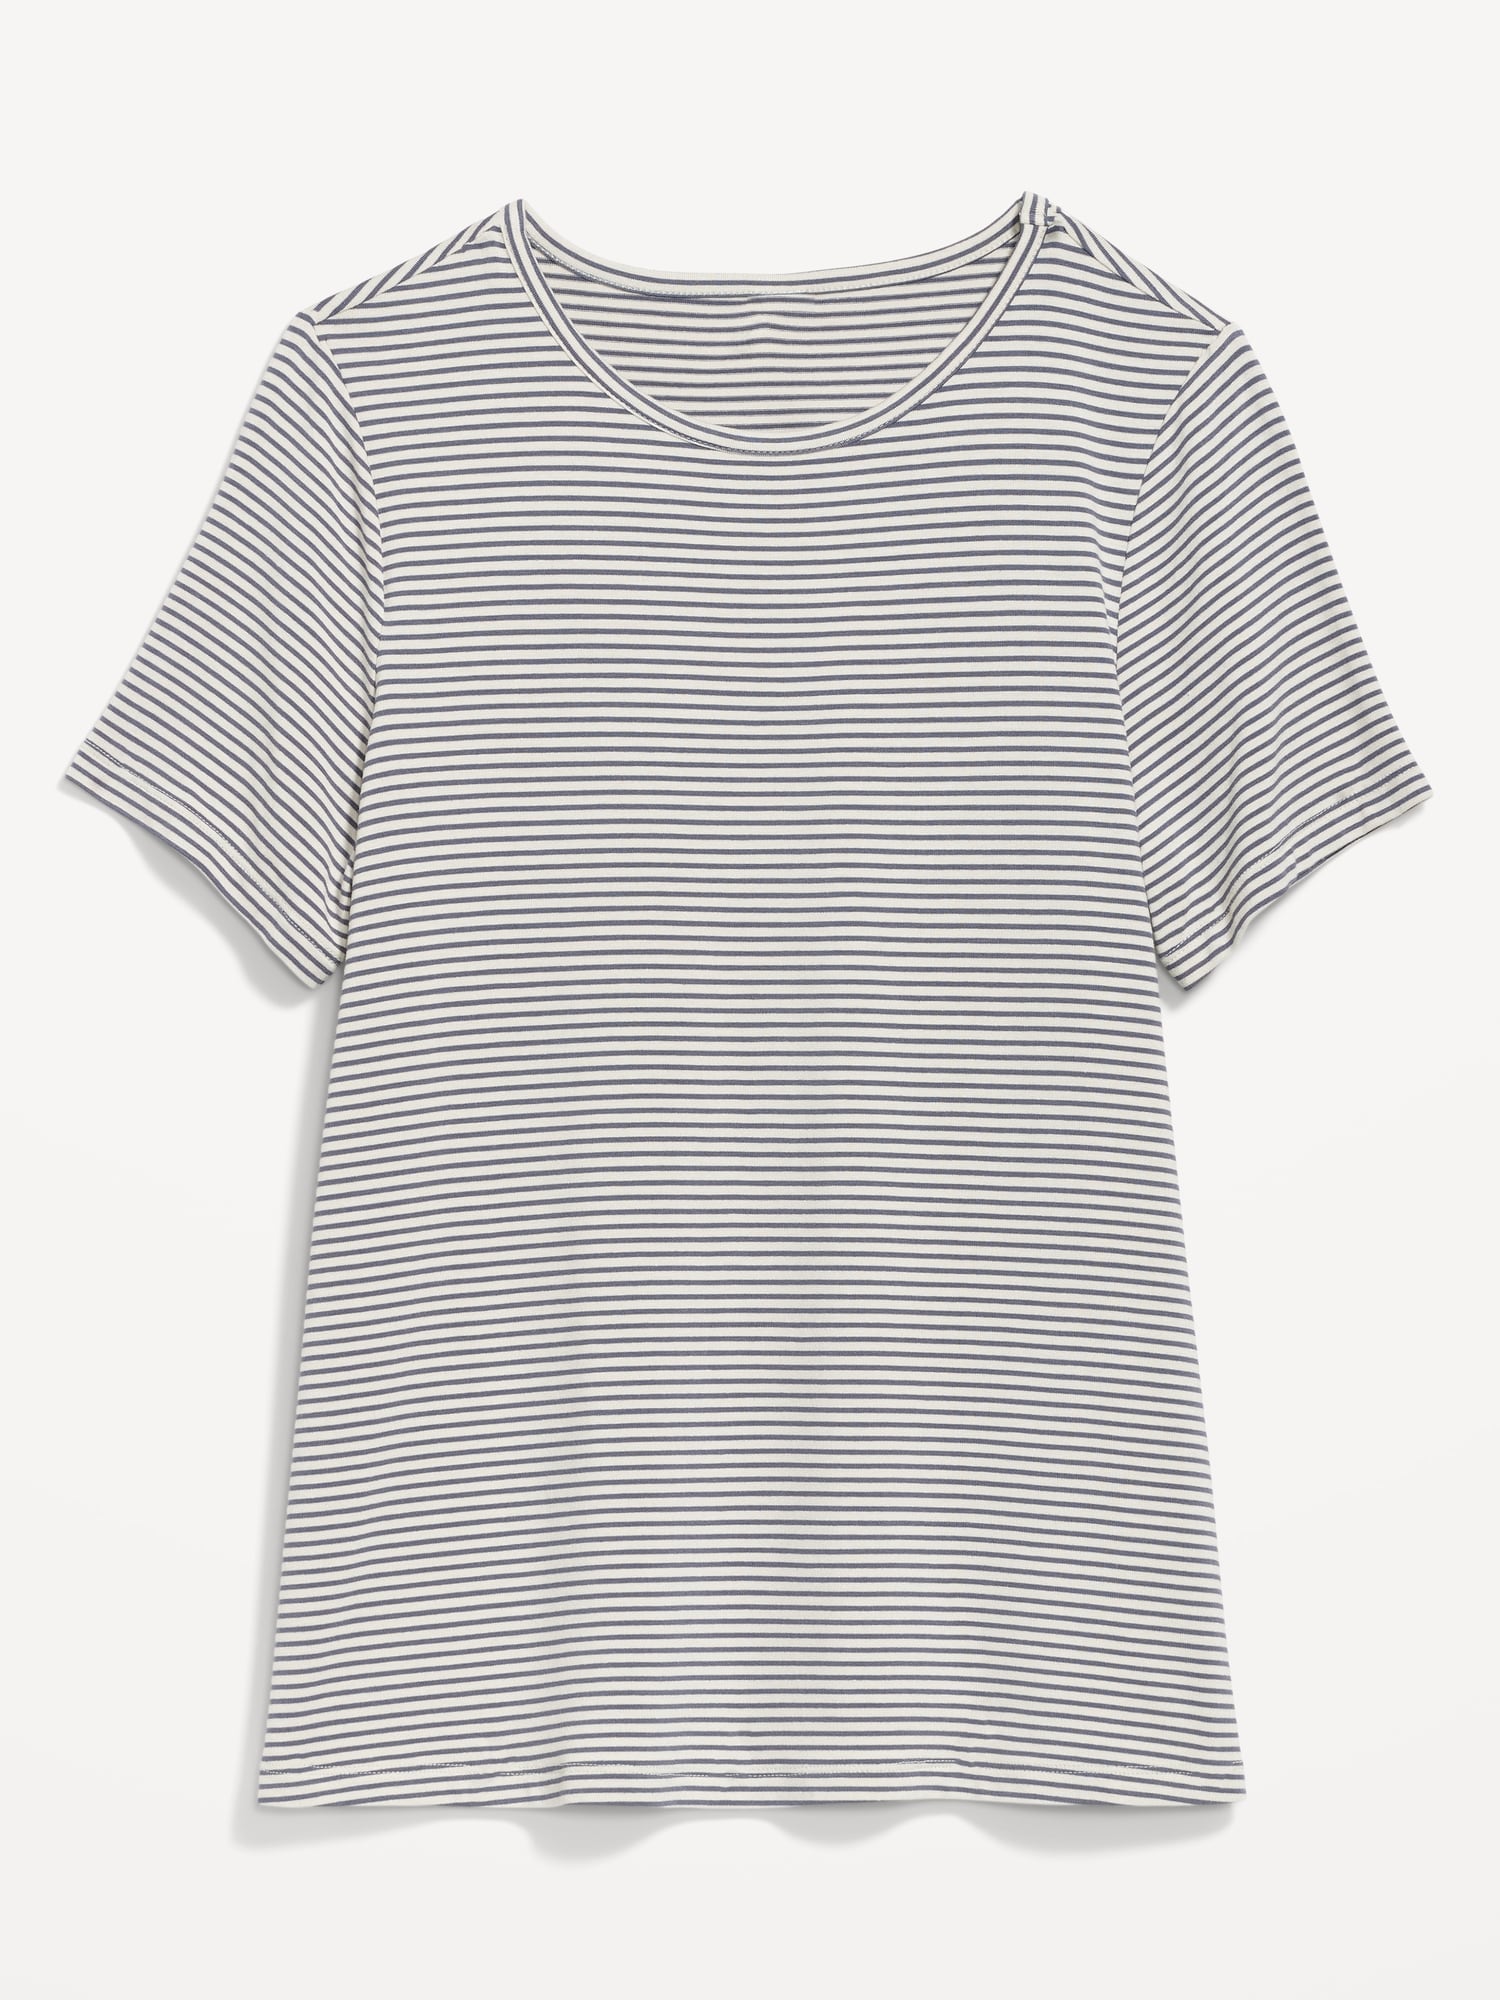 | Old Striped Navy for Women Luxe T-Shirt